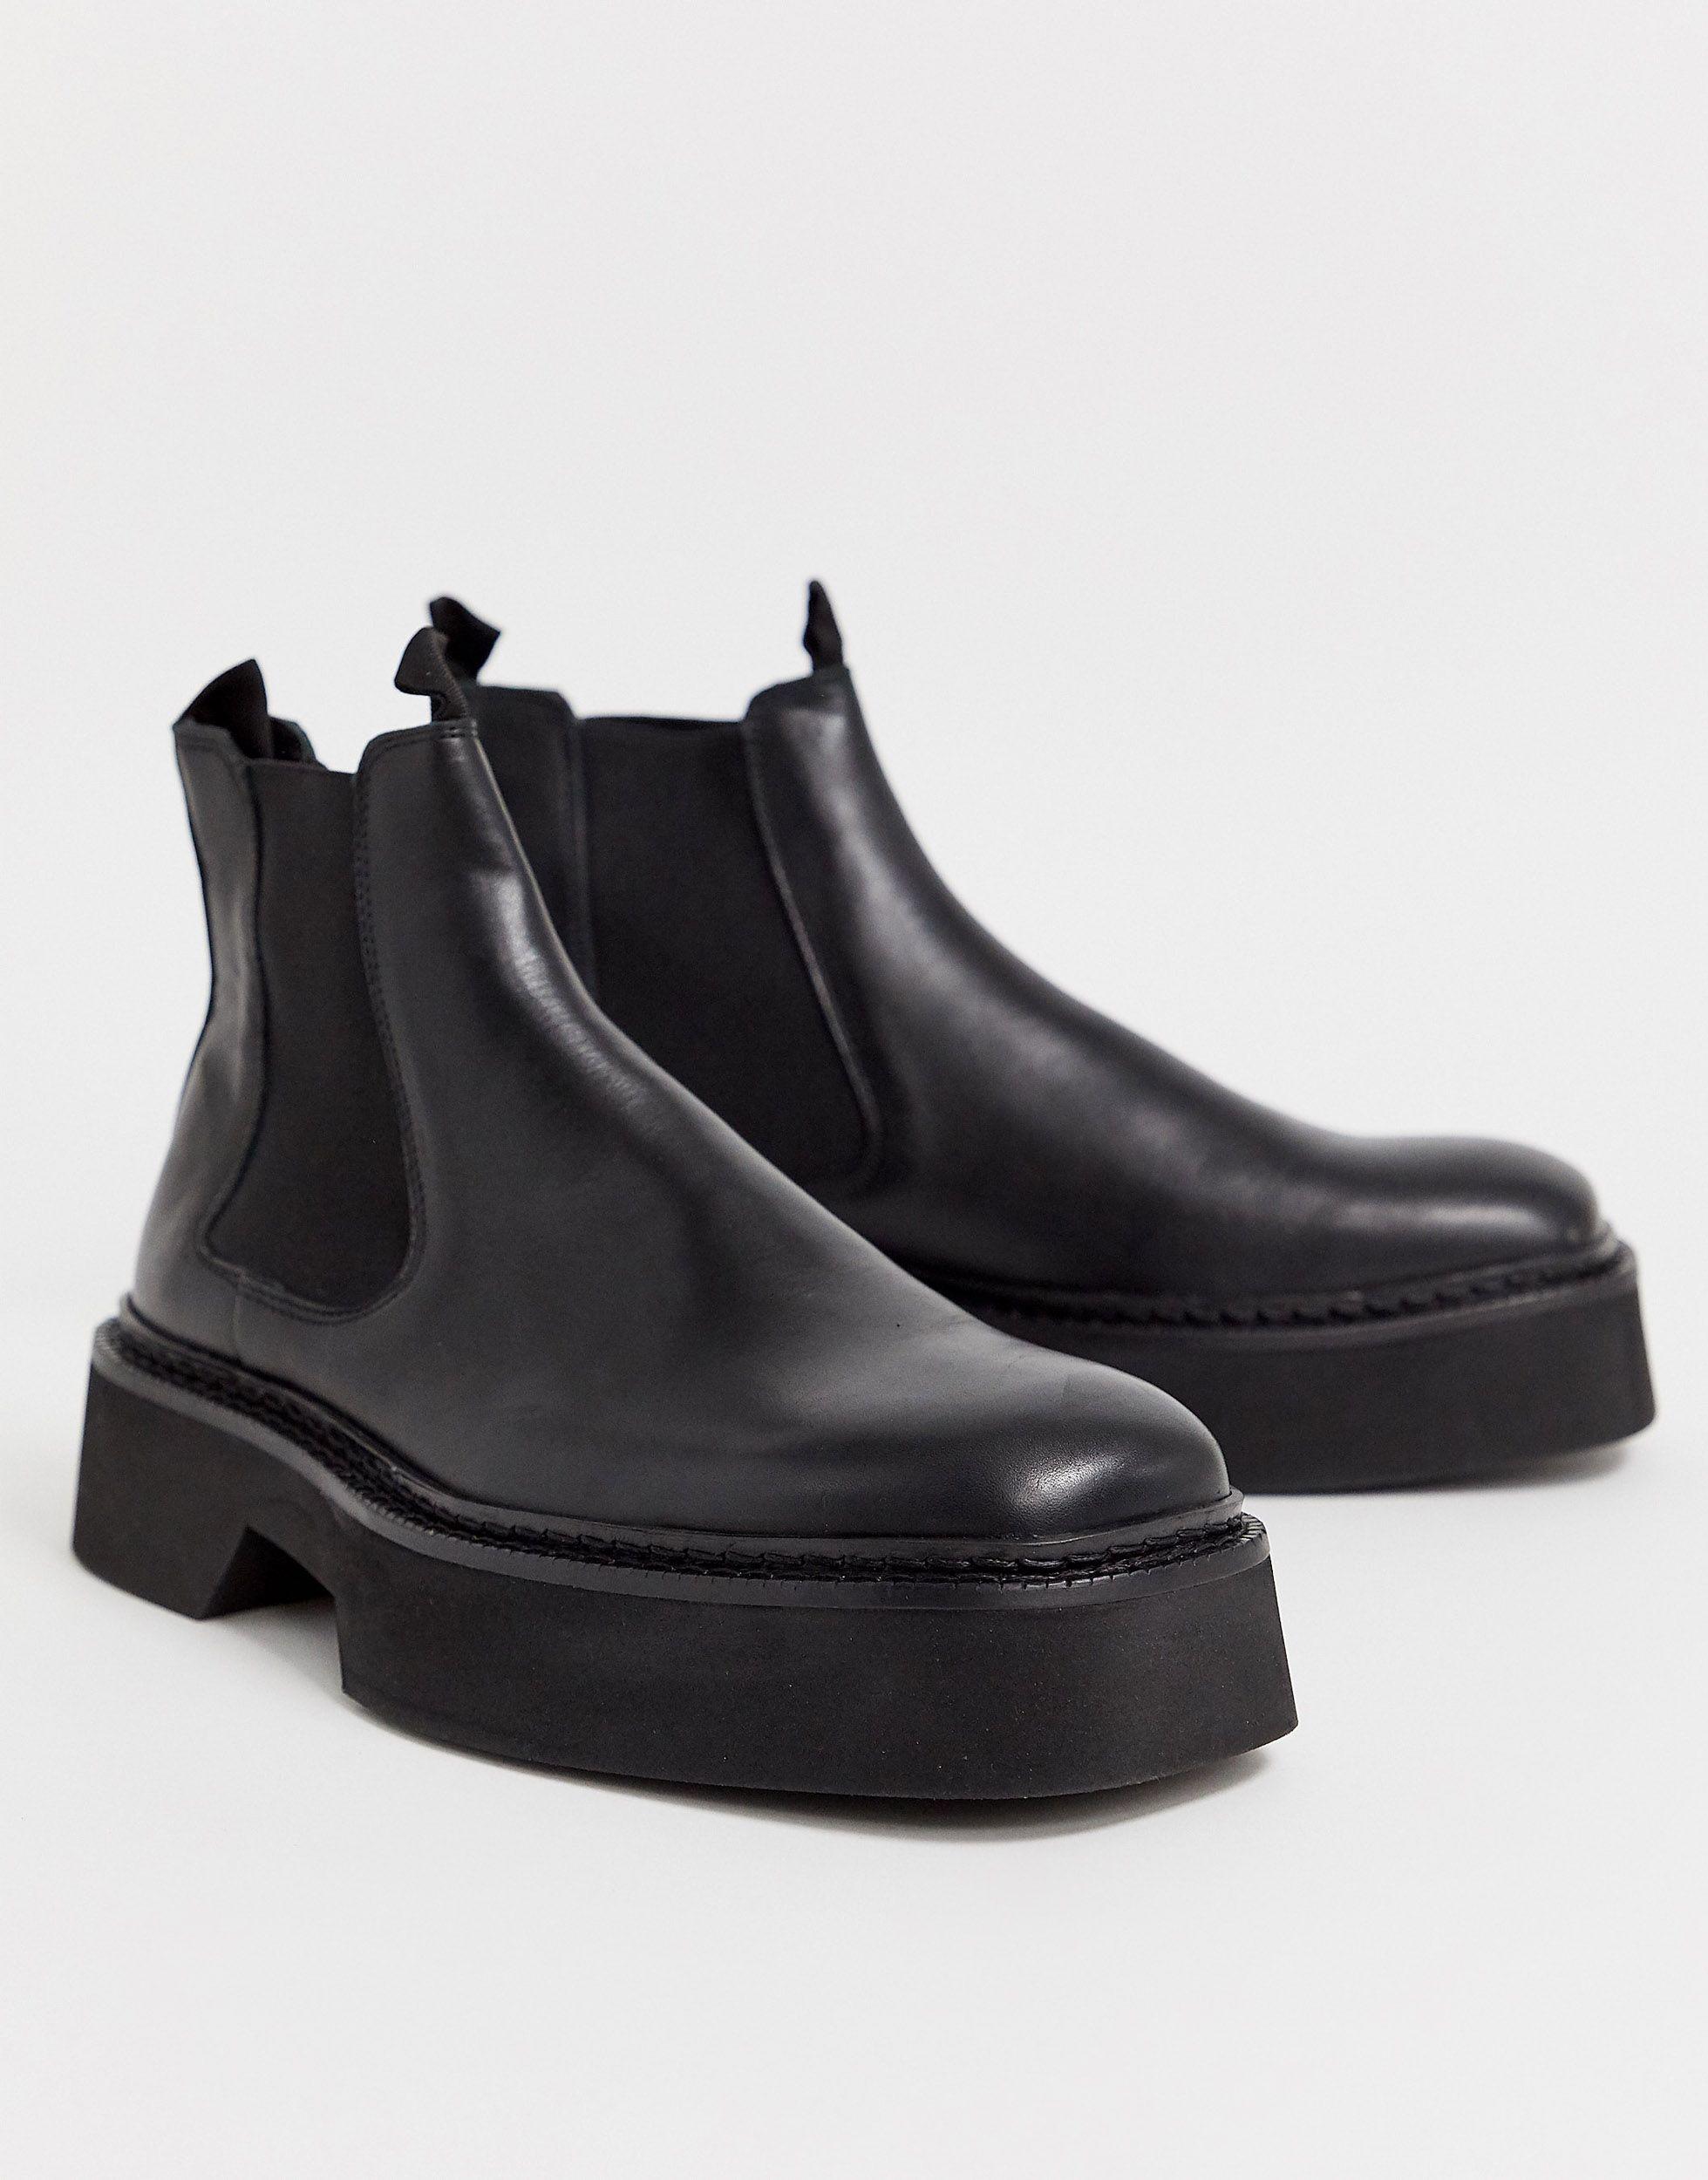 ASOS Leather Chelsea Square Toe Boots in Black for Men - Lyst